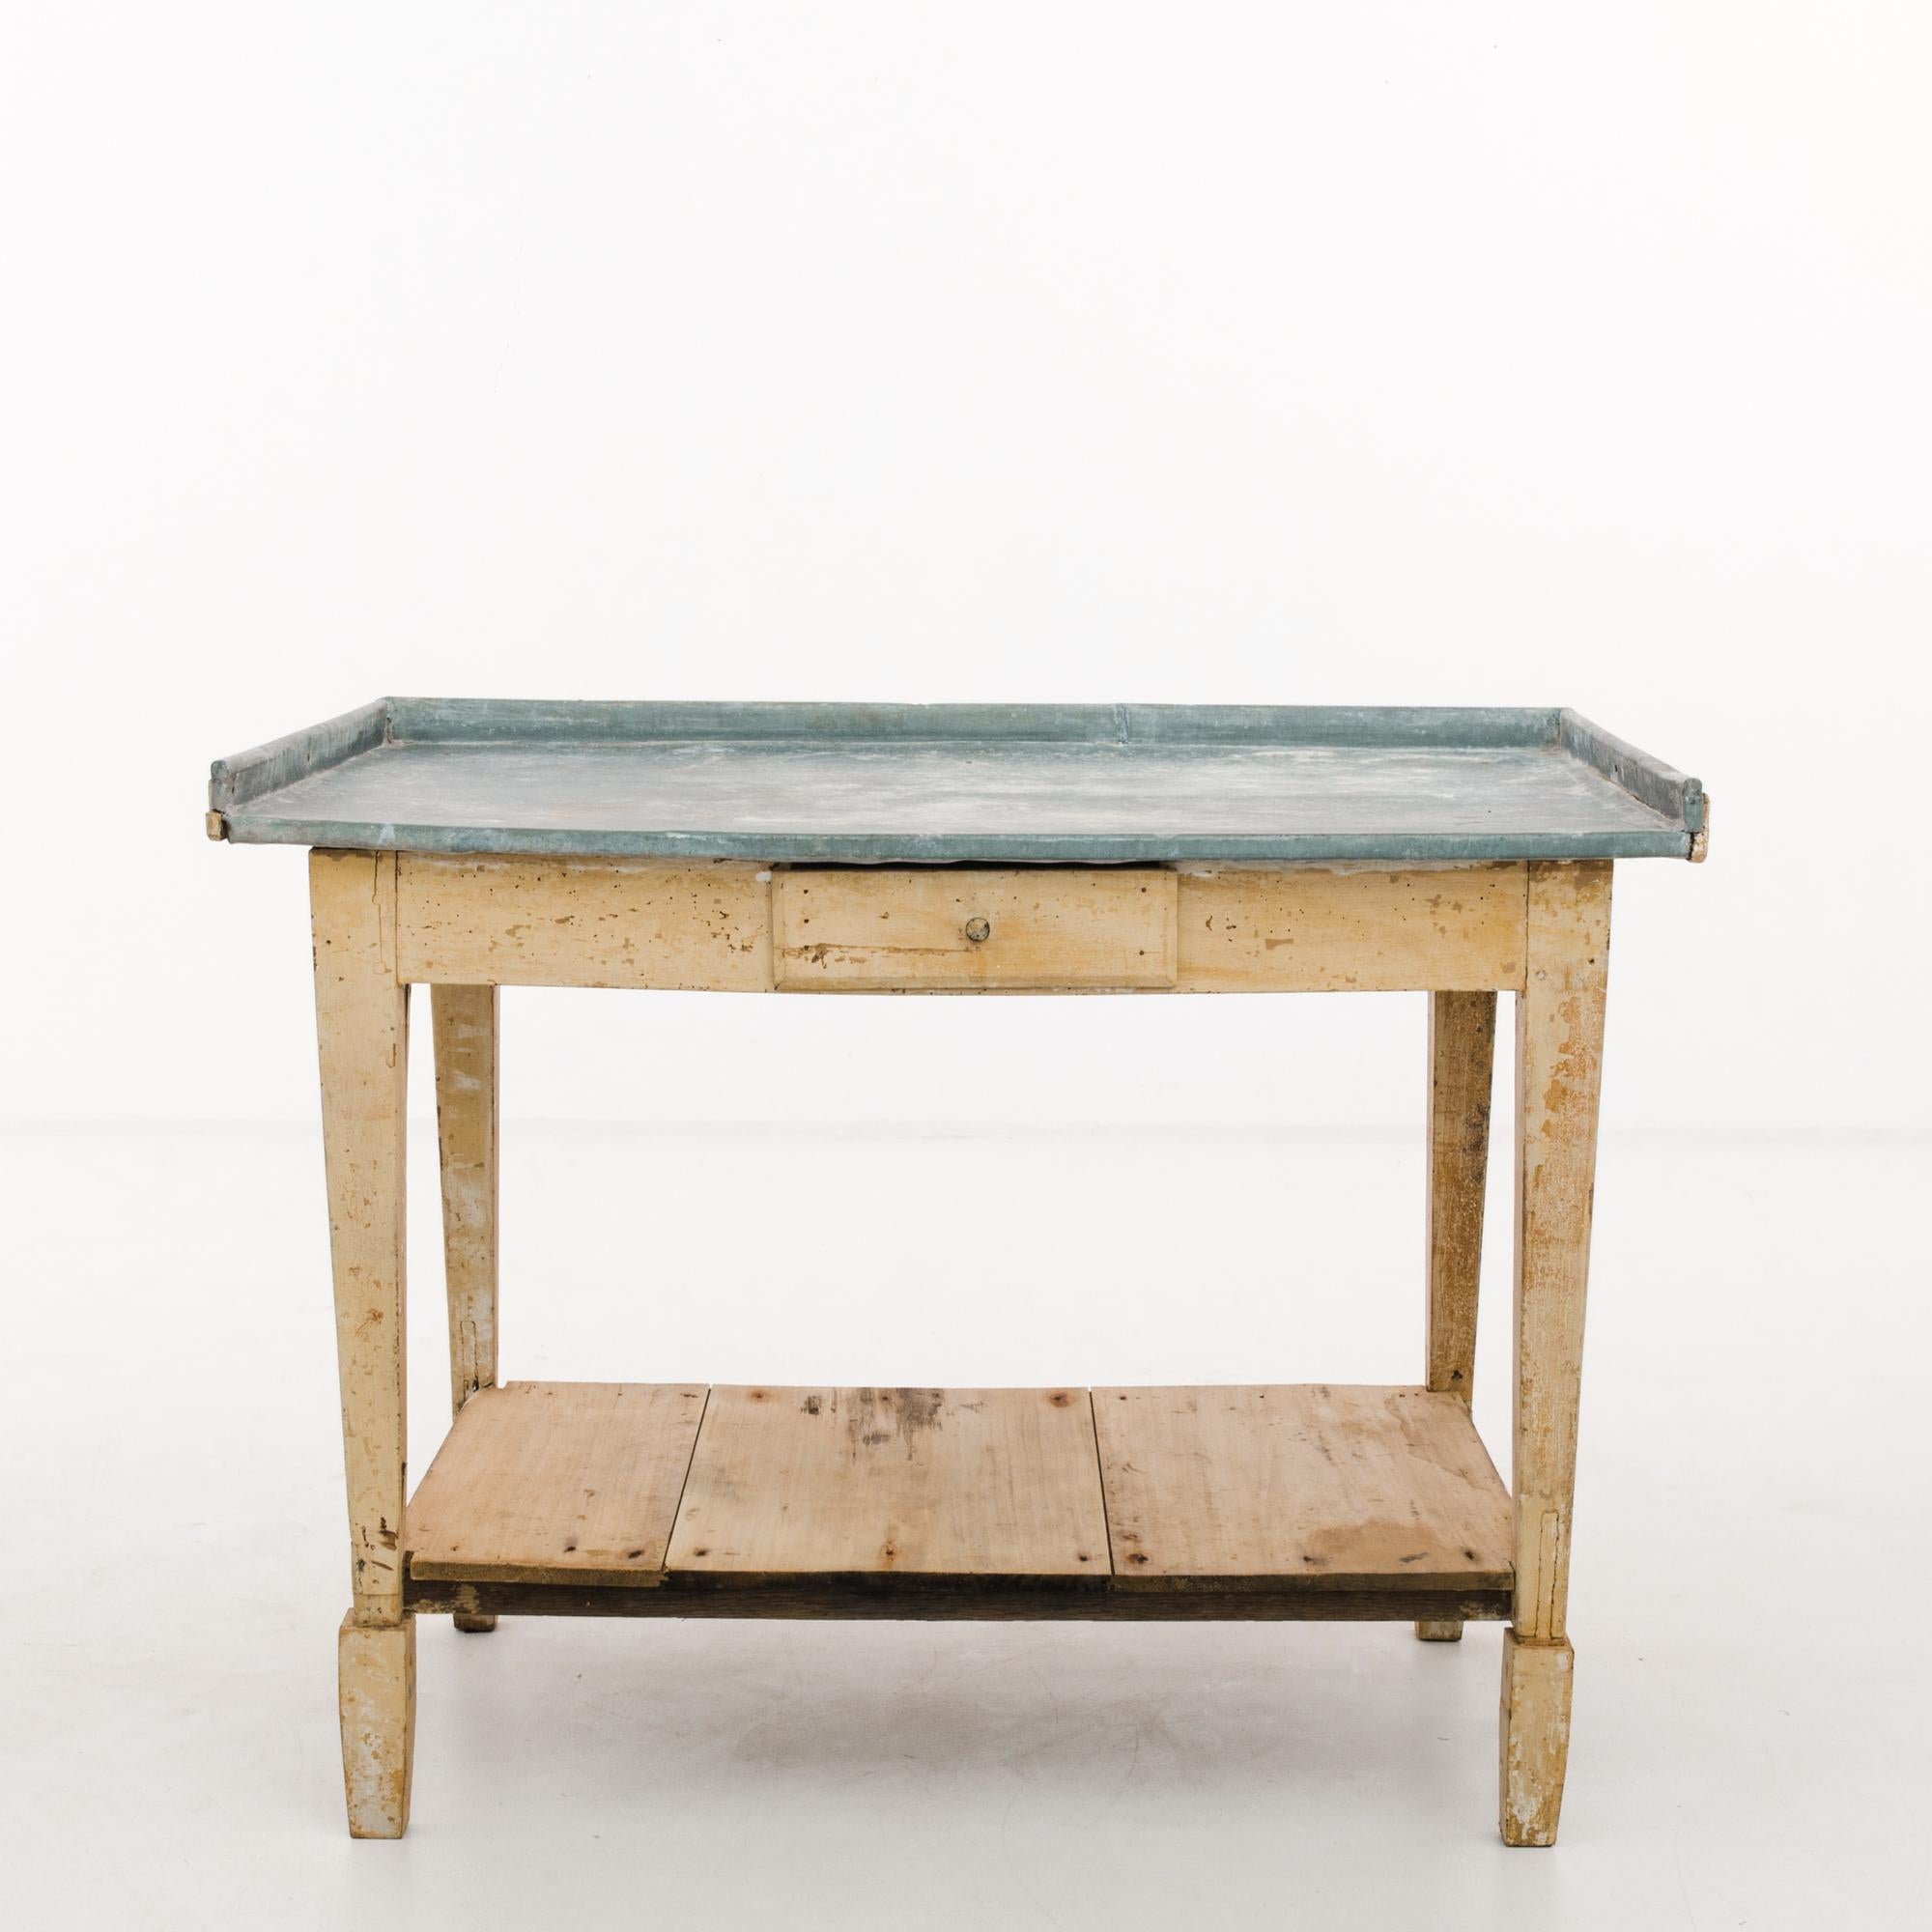 A wood patinated table with zinc top, produced circa 1900. A vintage work table standing on legs like four obelisks, featuring a sliding shelf under the tabletop, and a lower shelf of wood planks. The naturally anti-microbial and non-porous